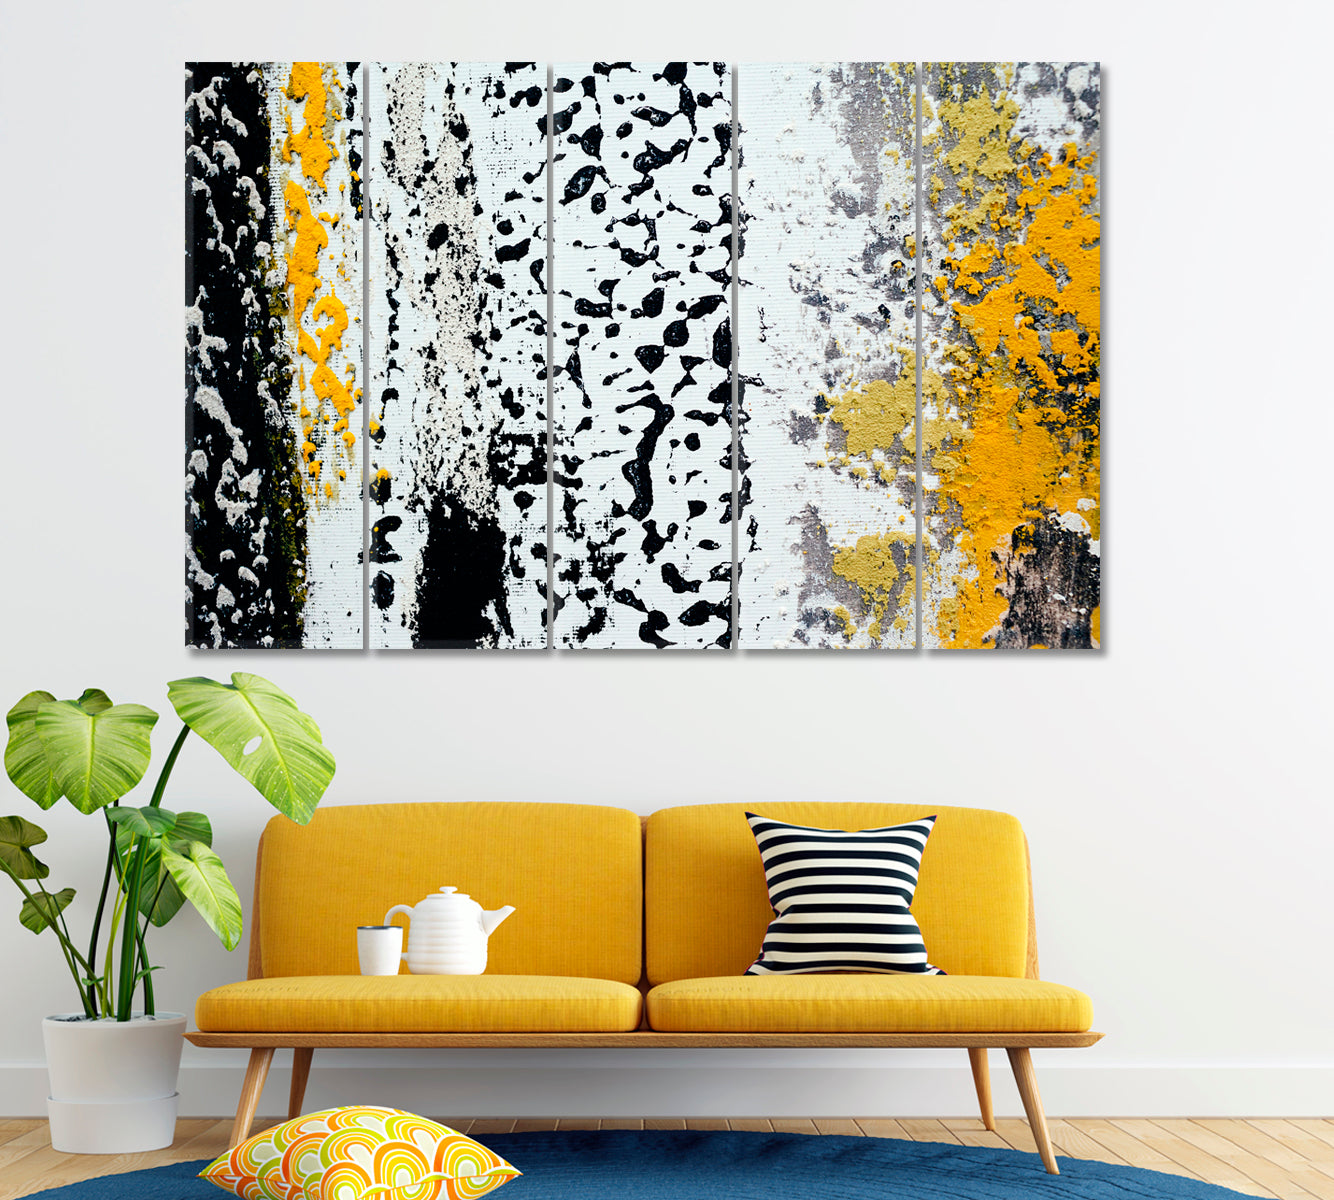 Abstract Black Splashes Canvas Print ArtLexy 5 Panels 36"x24" inches 